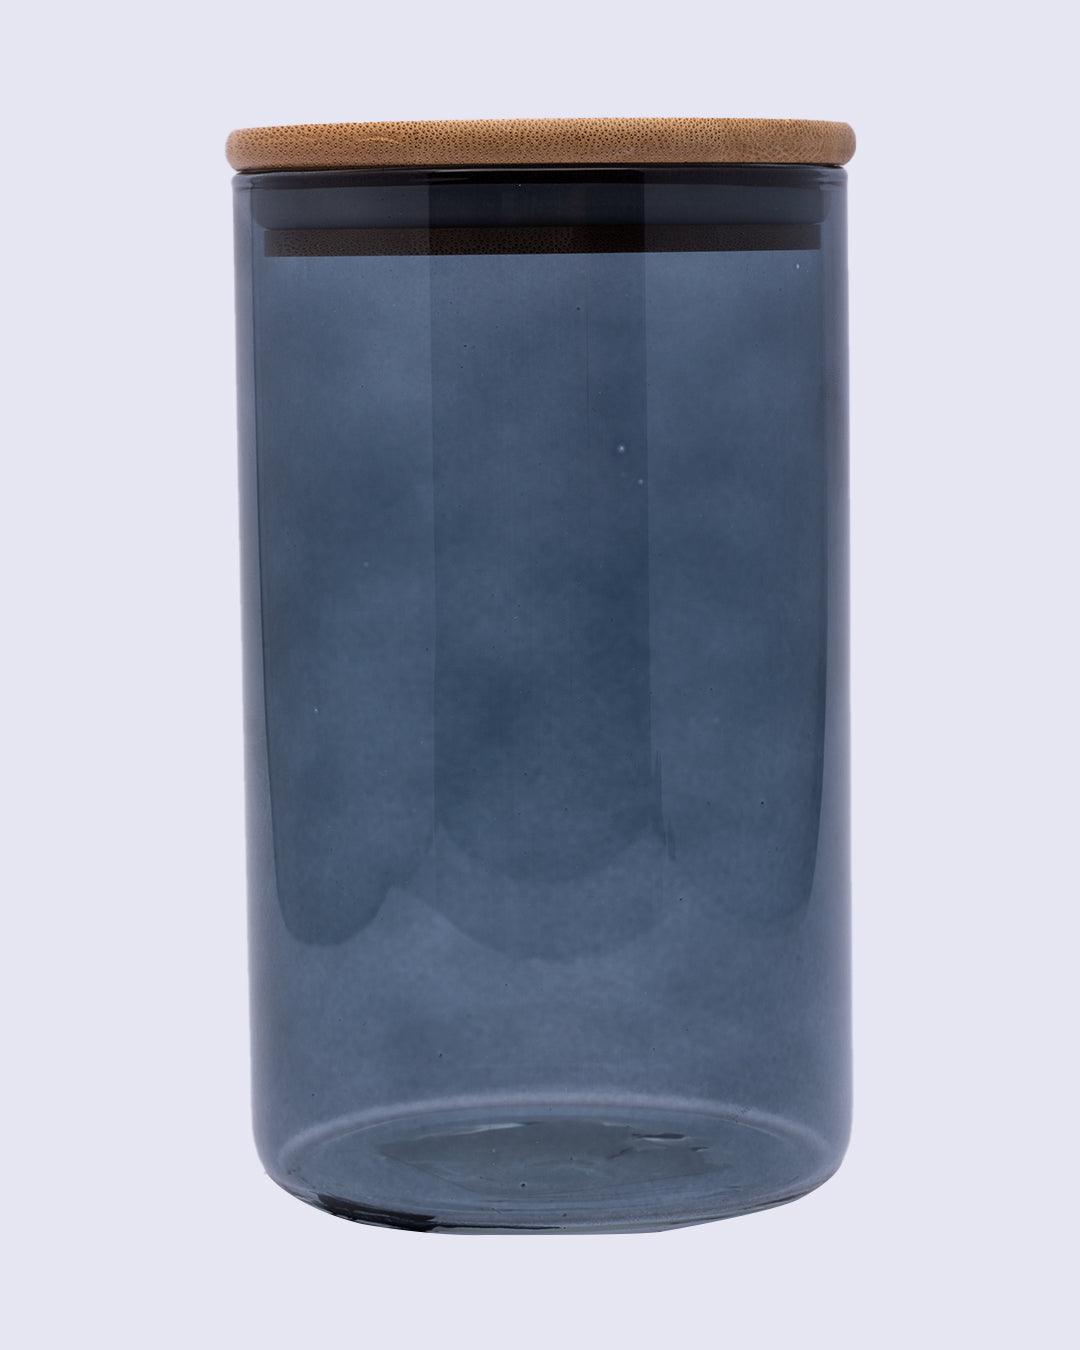 Glass Jar, with Lid, Storage Container, Black, Glass, 1 Litre - MARKET 99